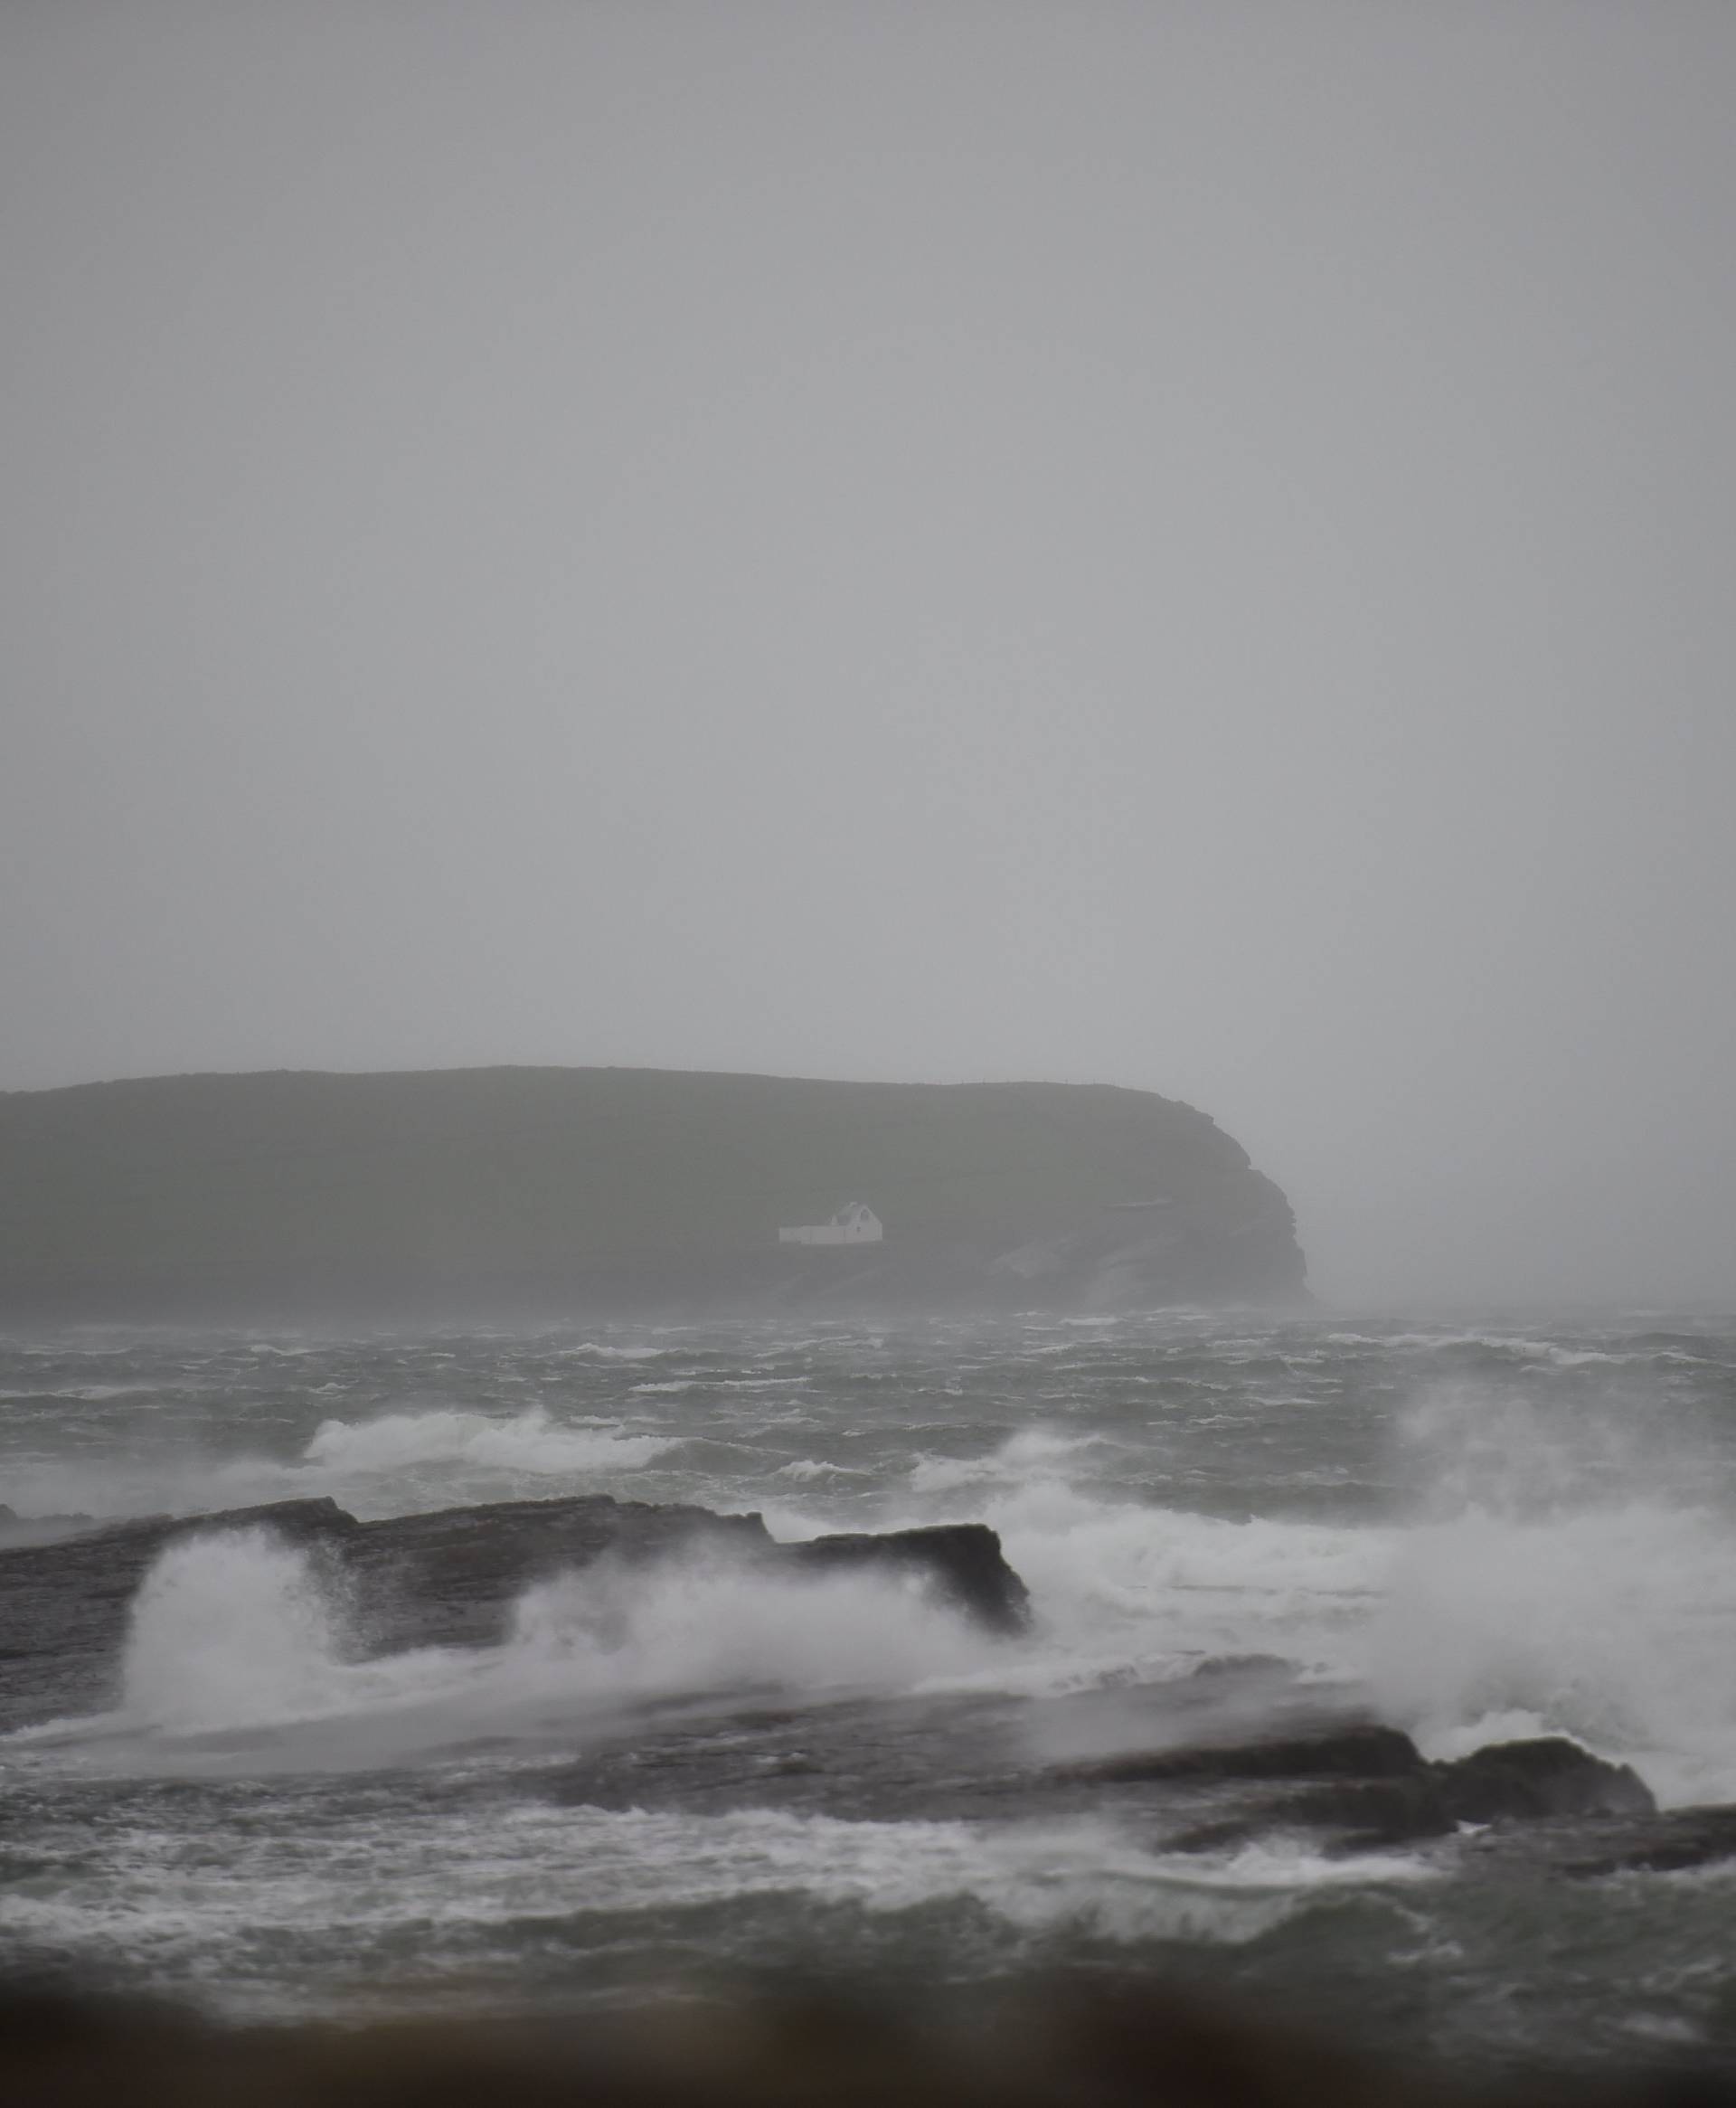 Storm Ophelia whips up the sea as it makes landfall along County Clare peninsula of Loop Head